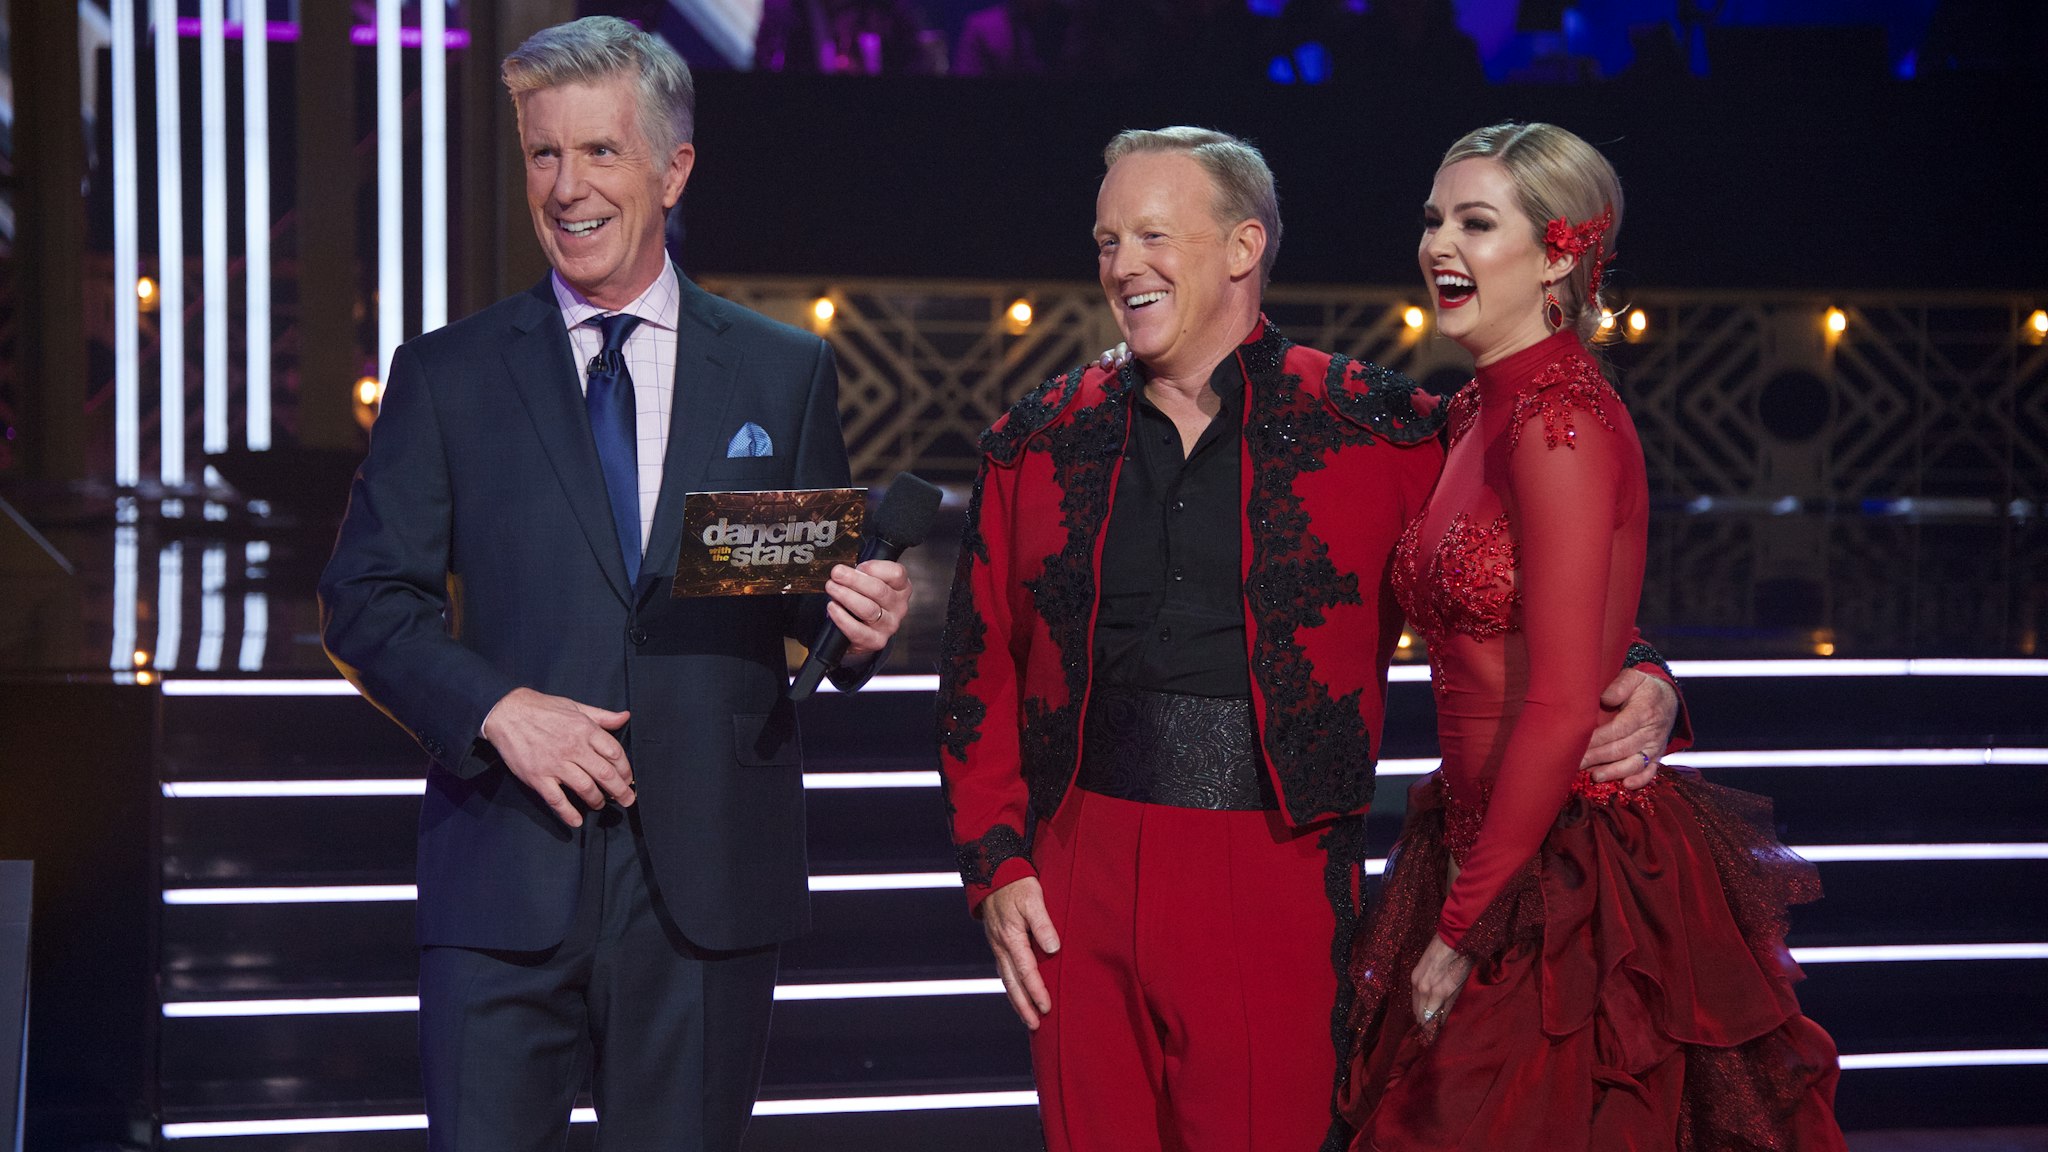 DANCING WITH THE STARS - "Top 10" - It's another week of competition as 10 celebrity and pro-dancer couples compete on the fourth week of the 2019 season of "Dancing with the Stars," live, MONDAY, OCT. 7 (8:00-10:00 p.m. EDT), on ABC. (Eric McCandless via Getty Images) TOM BERGERON, SEAN SPICER, LINDSAY ARNOLD